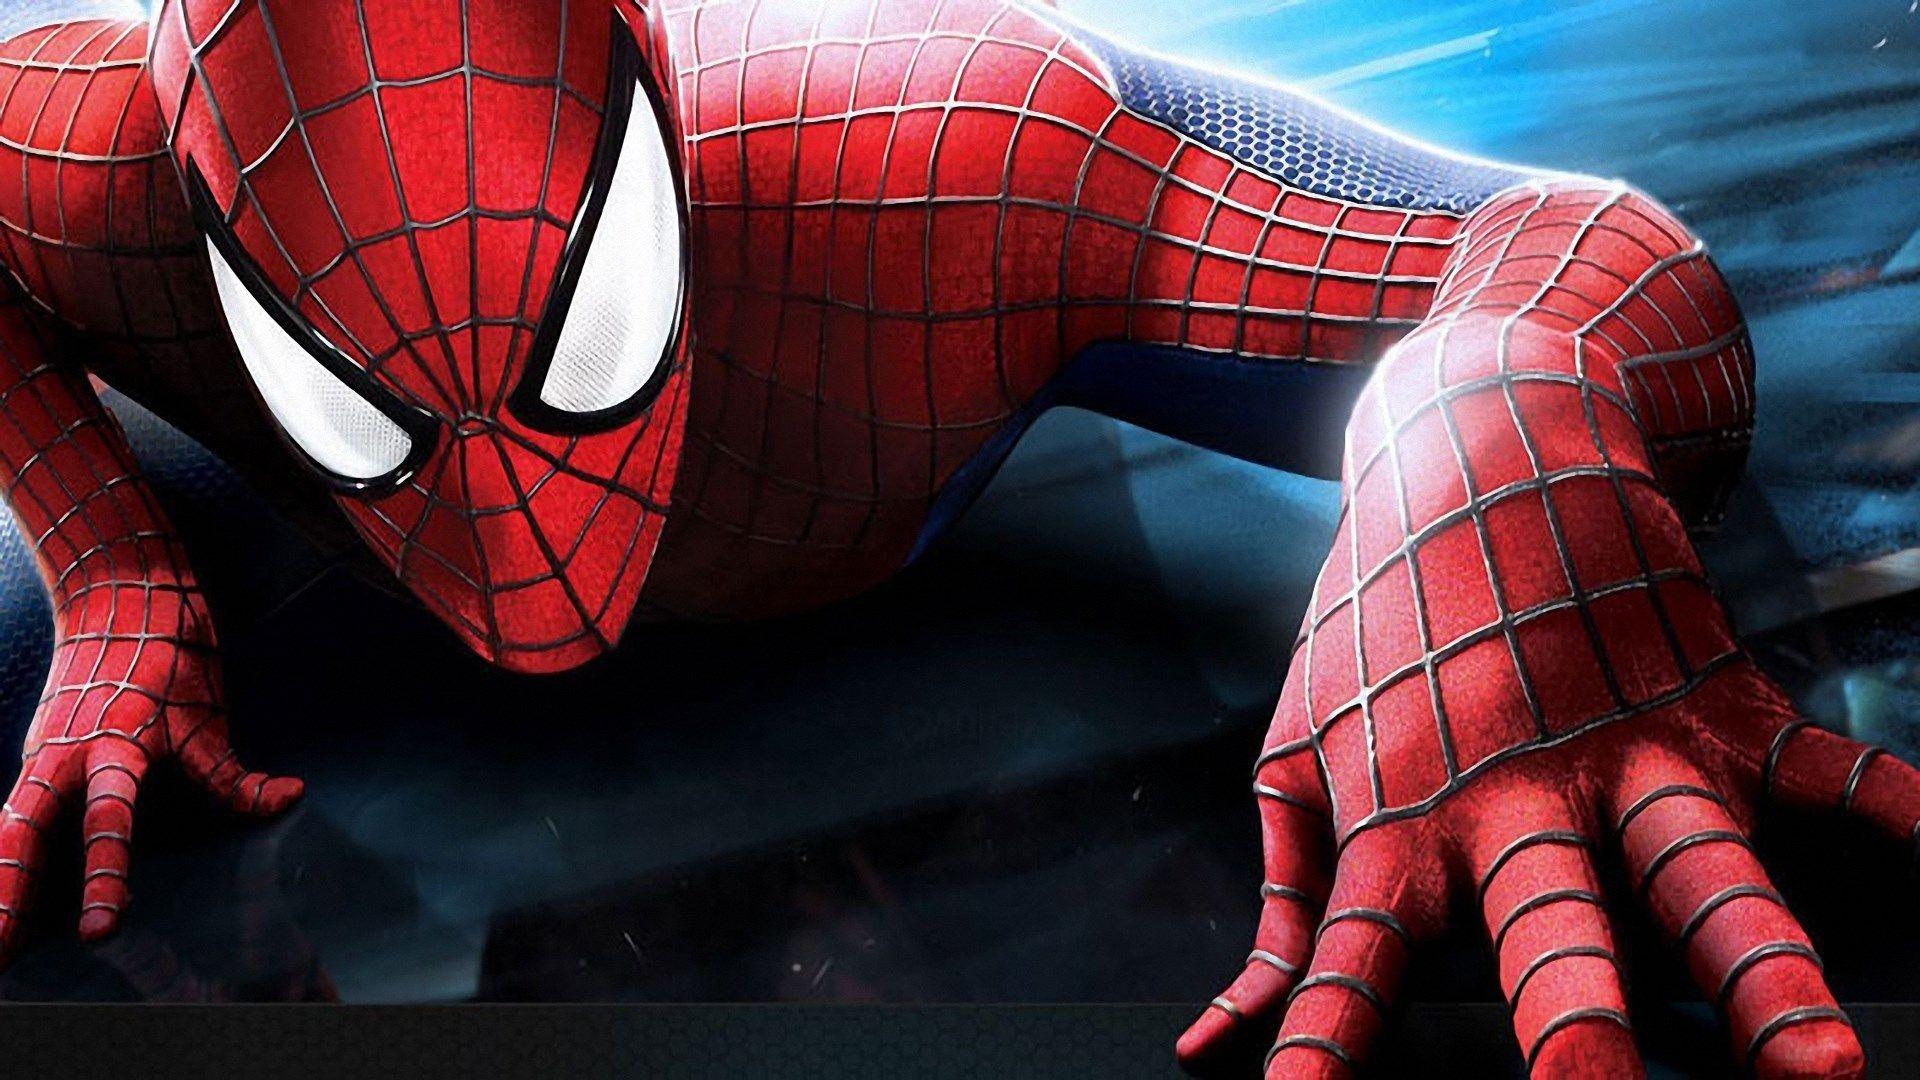 Spiderman HD Wallpaper background picture